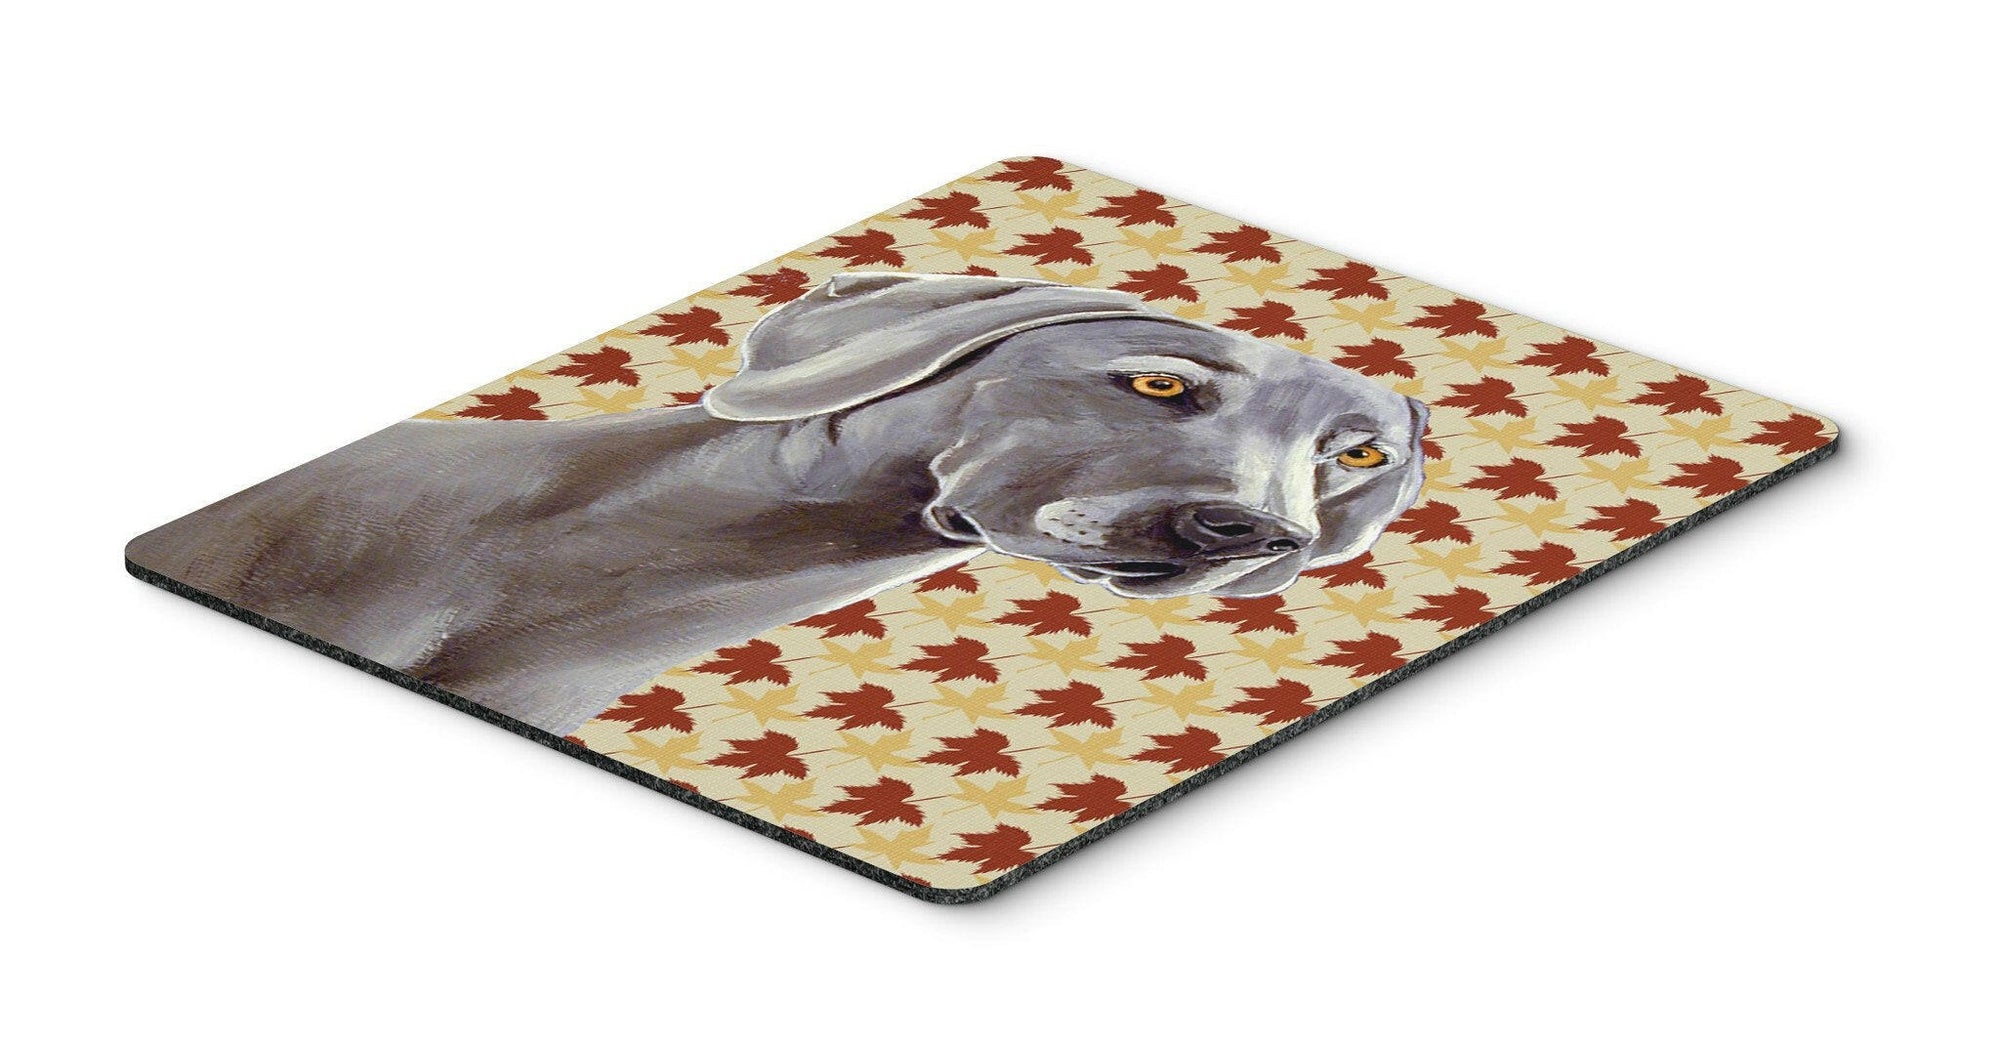 Weimaraner Fall Leaves Portrait Mouse Pad, Hot Pad or Trivet by Caroline's Treasures